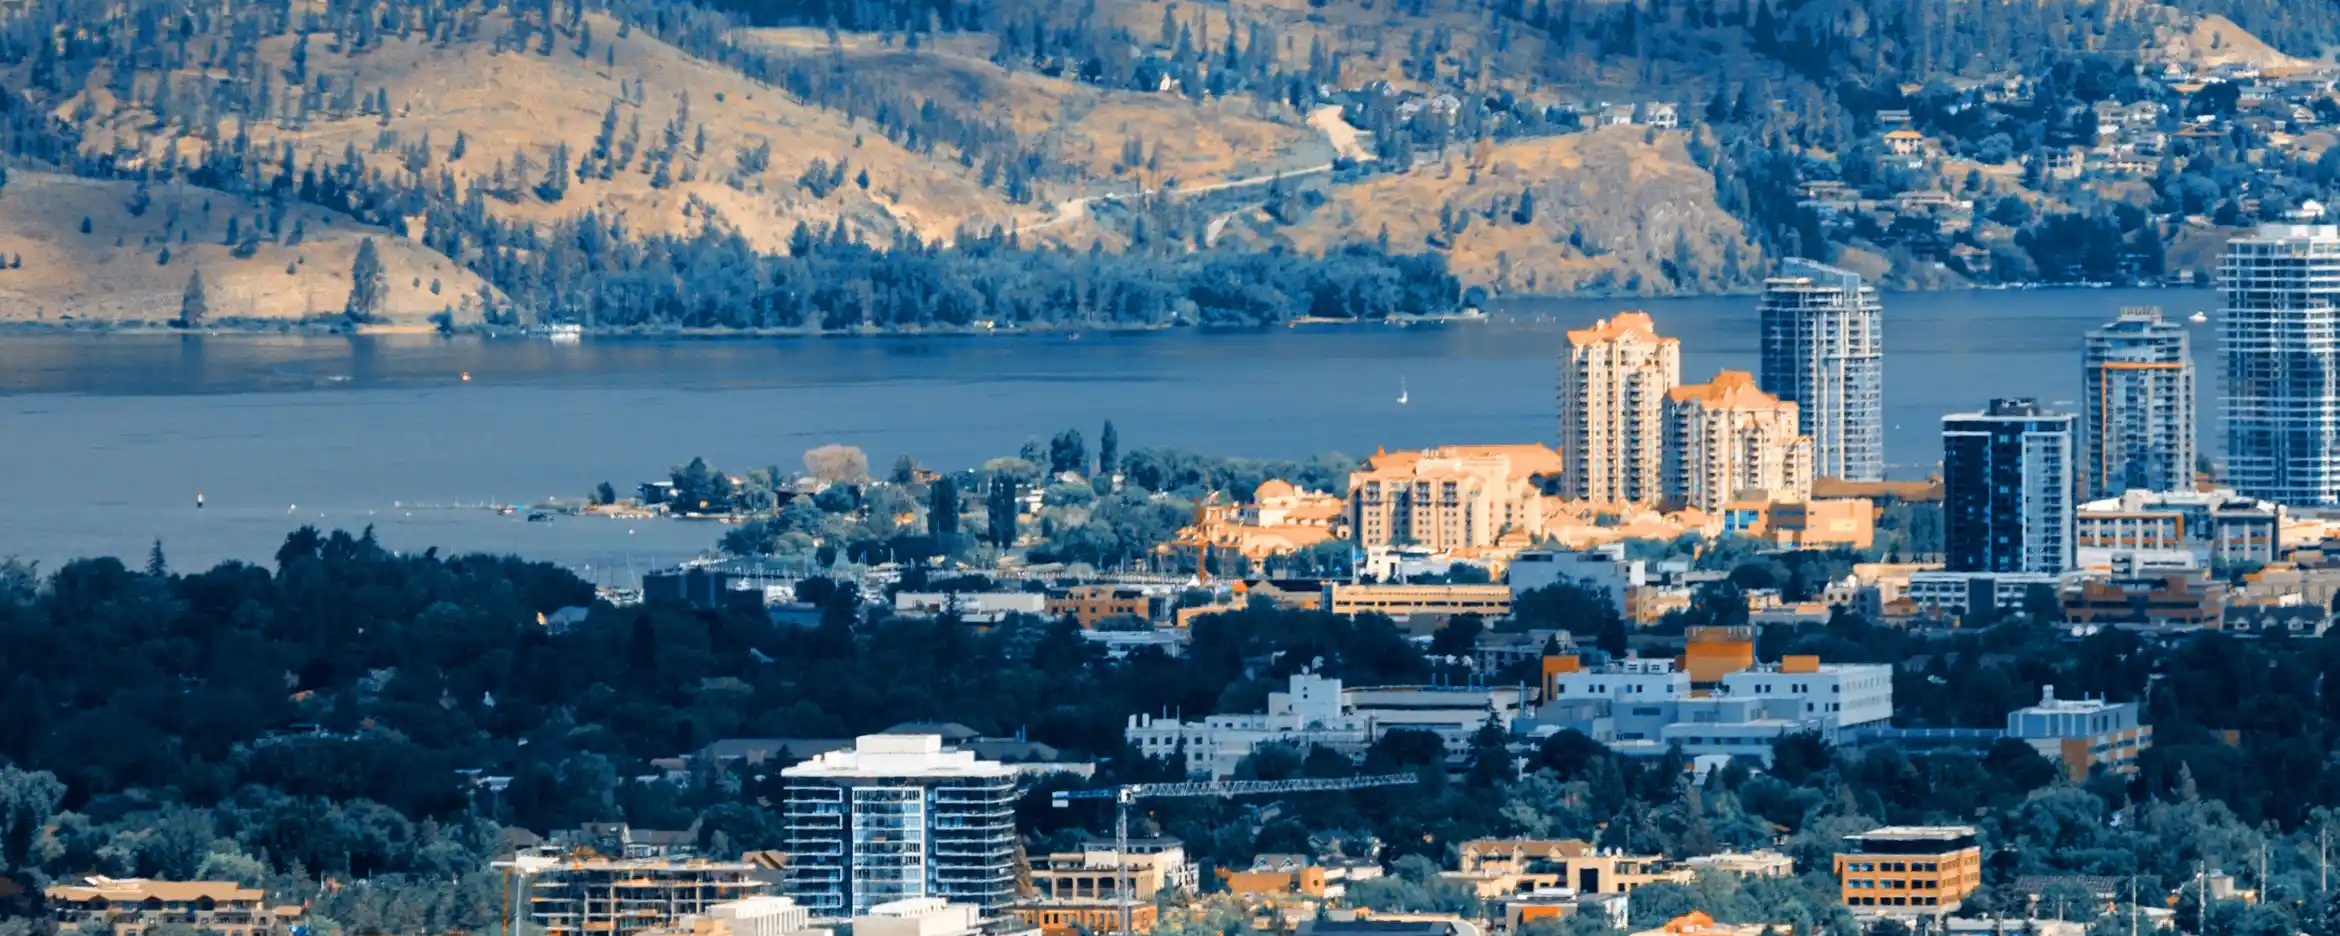 City of Kelowna with buildings in foreground and lake in background